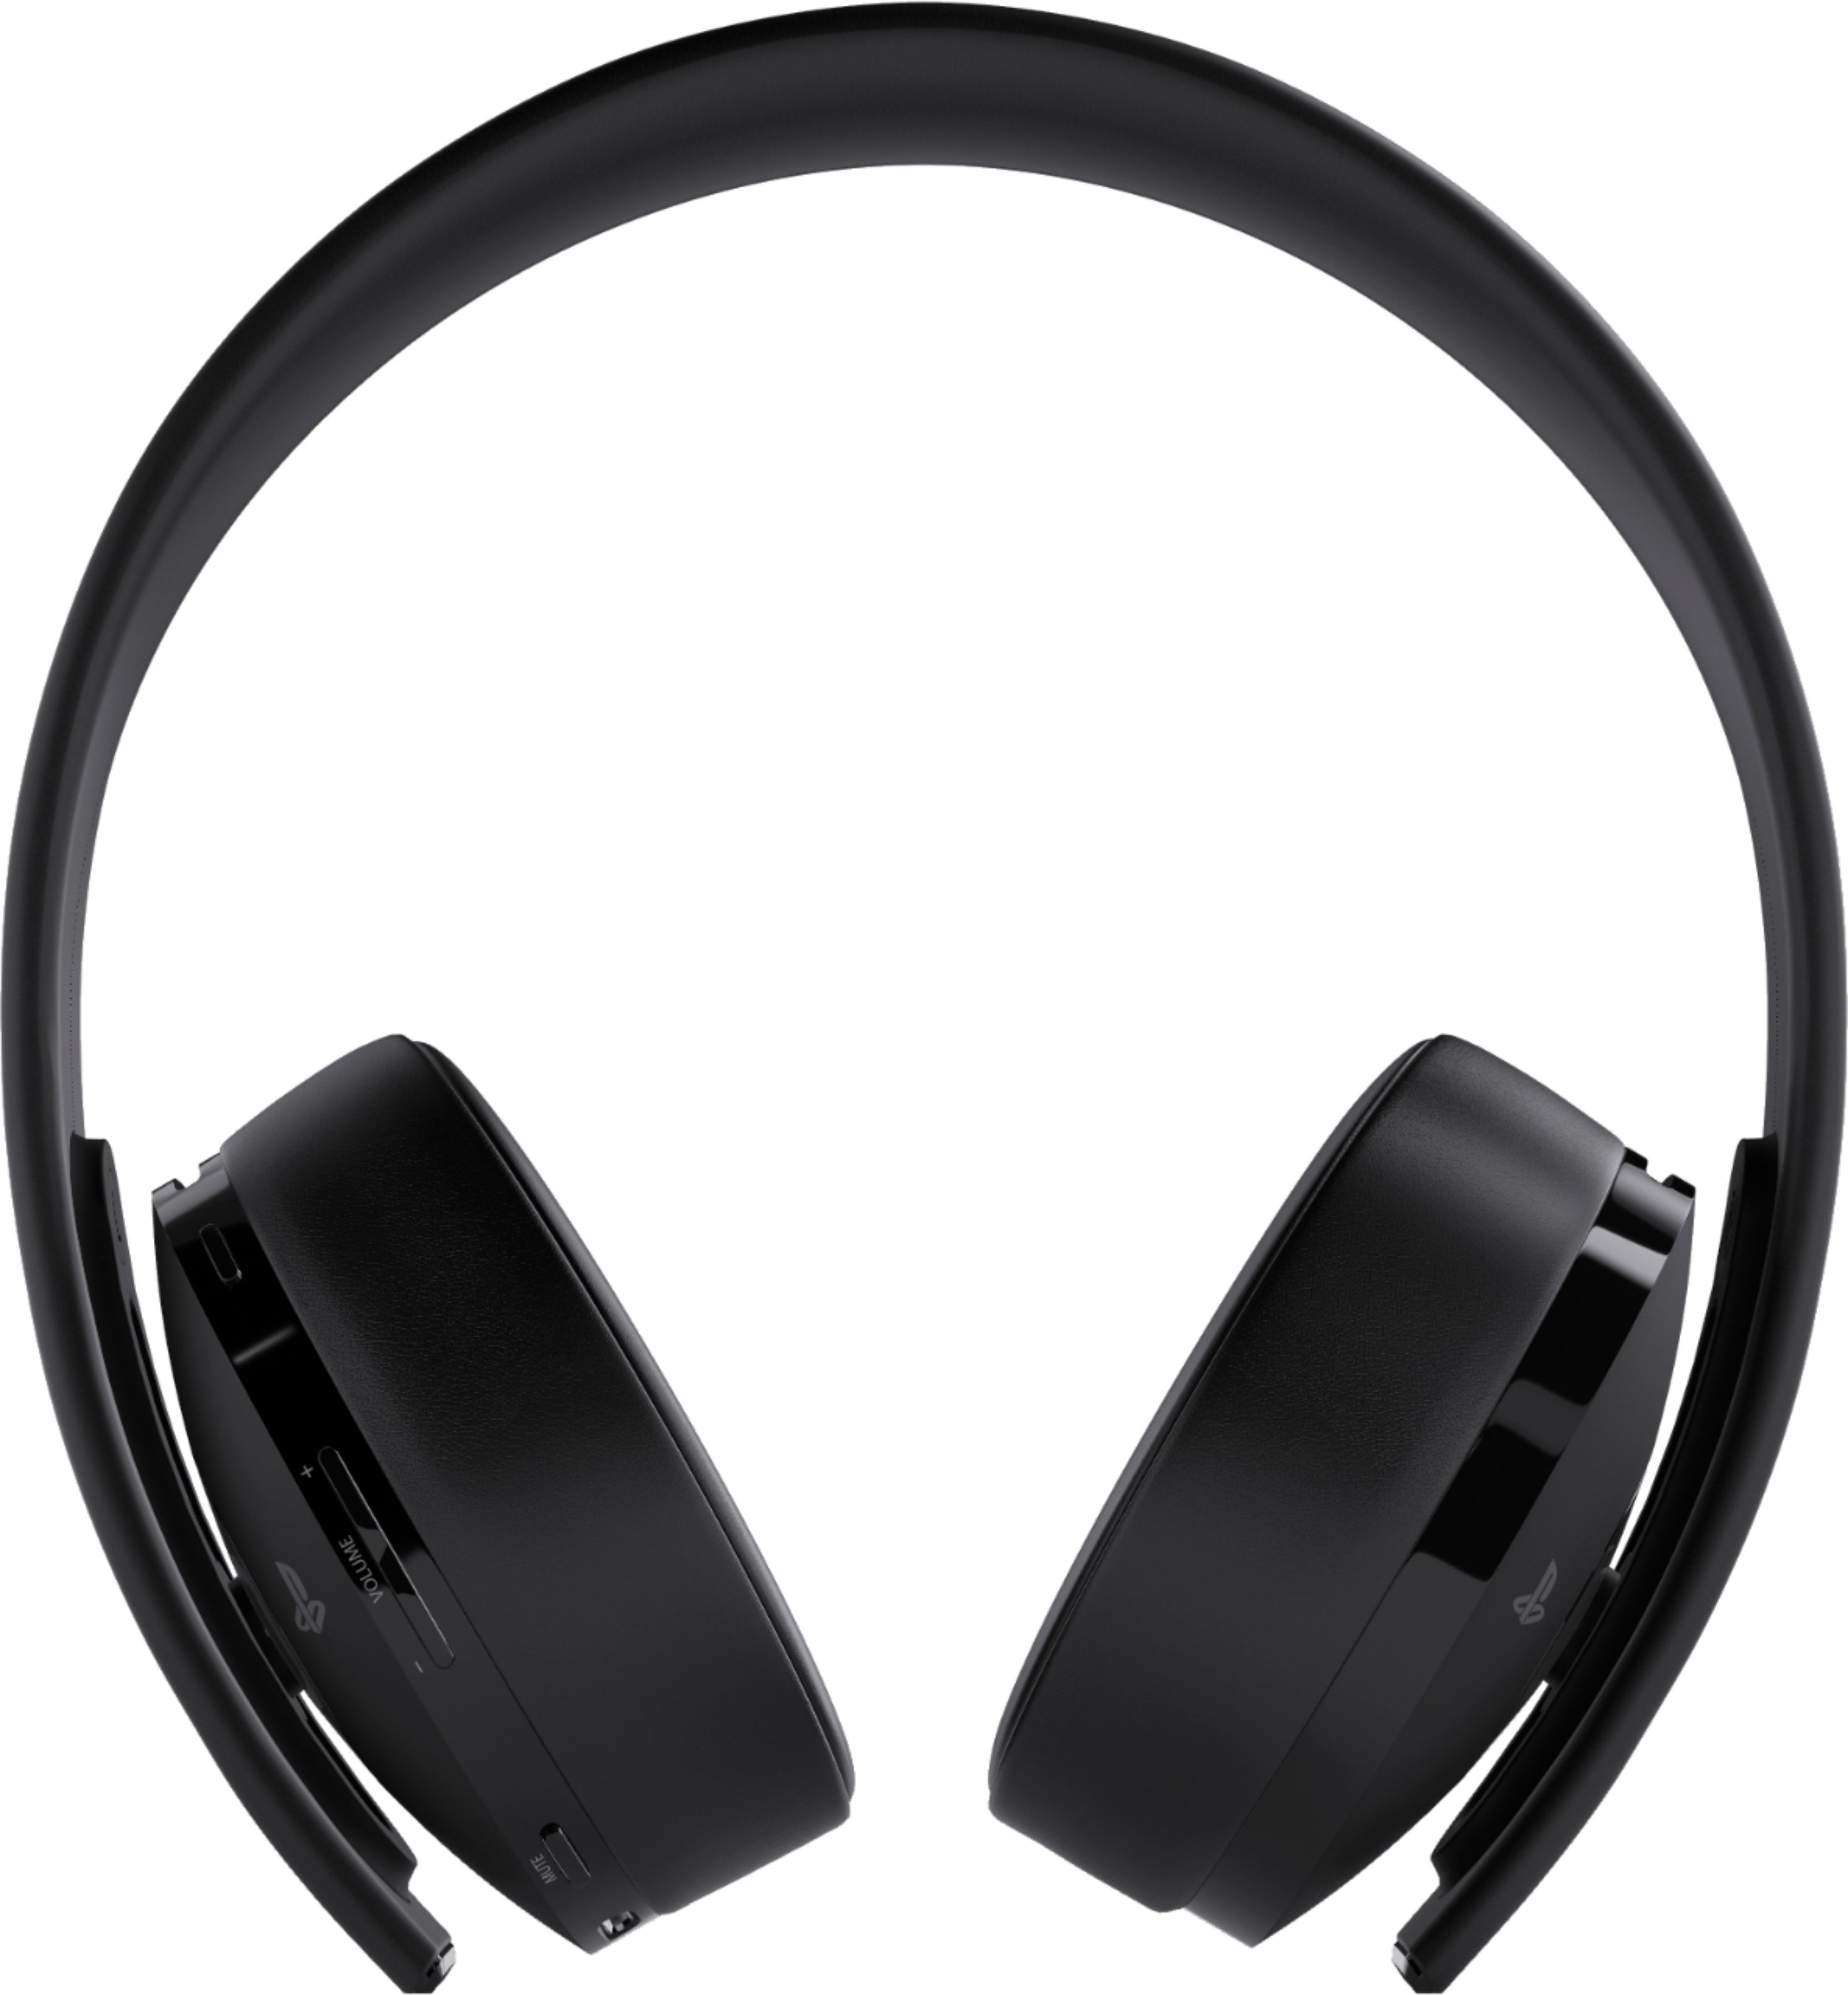 ps4 gold headset best buy